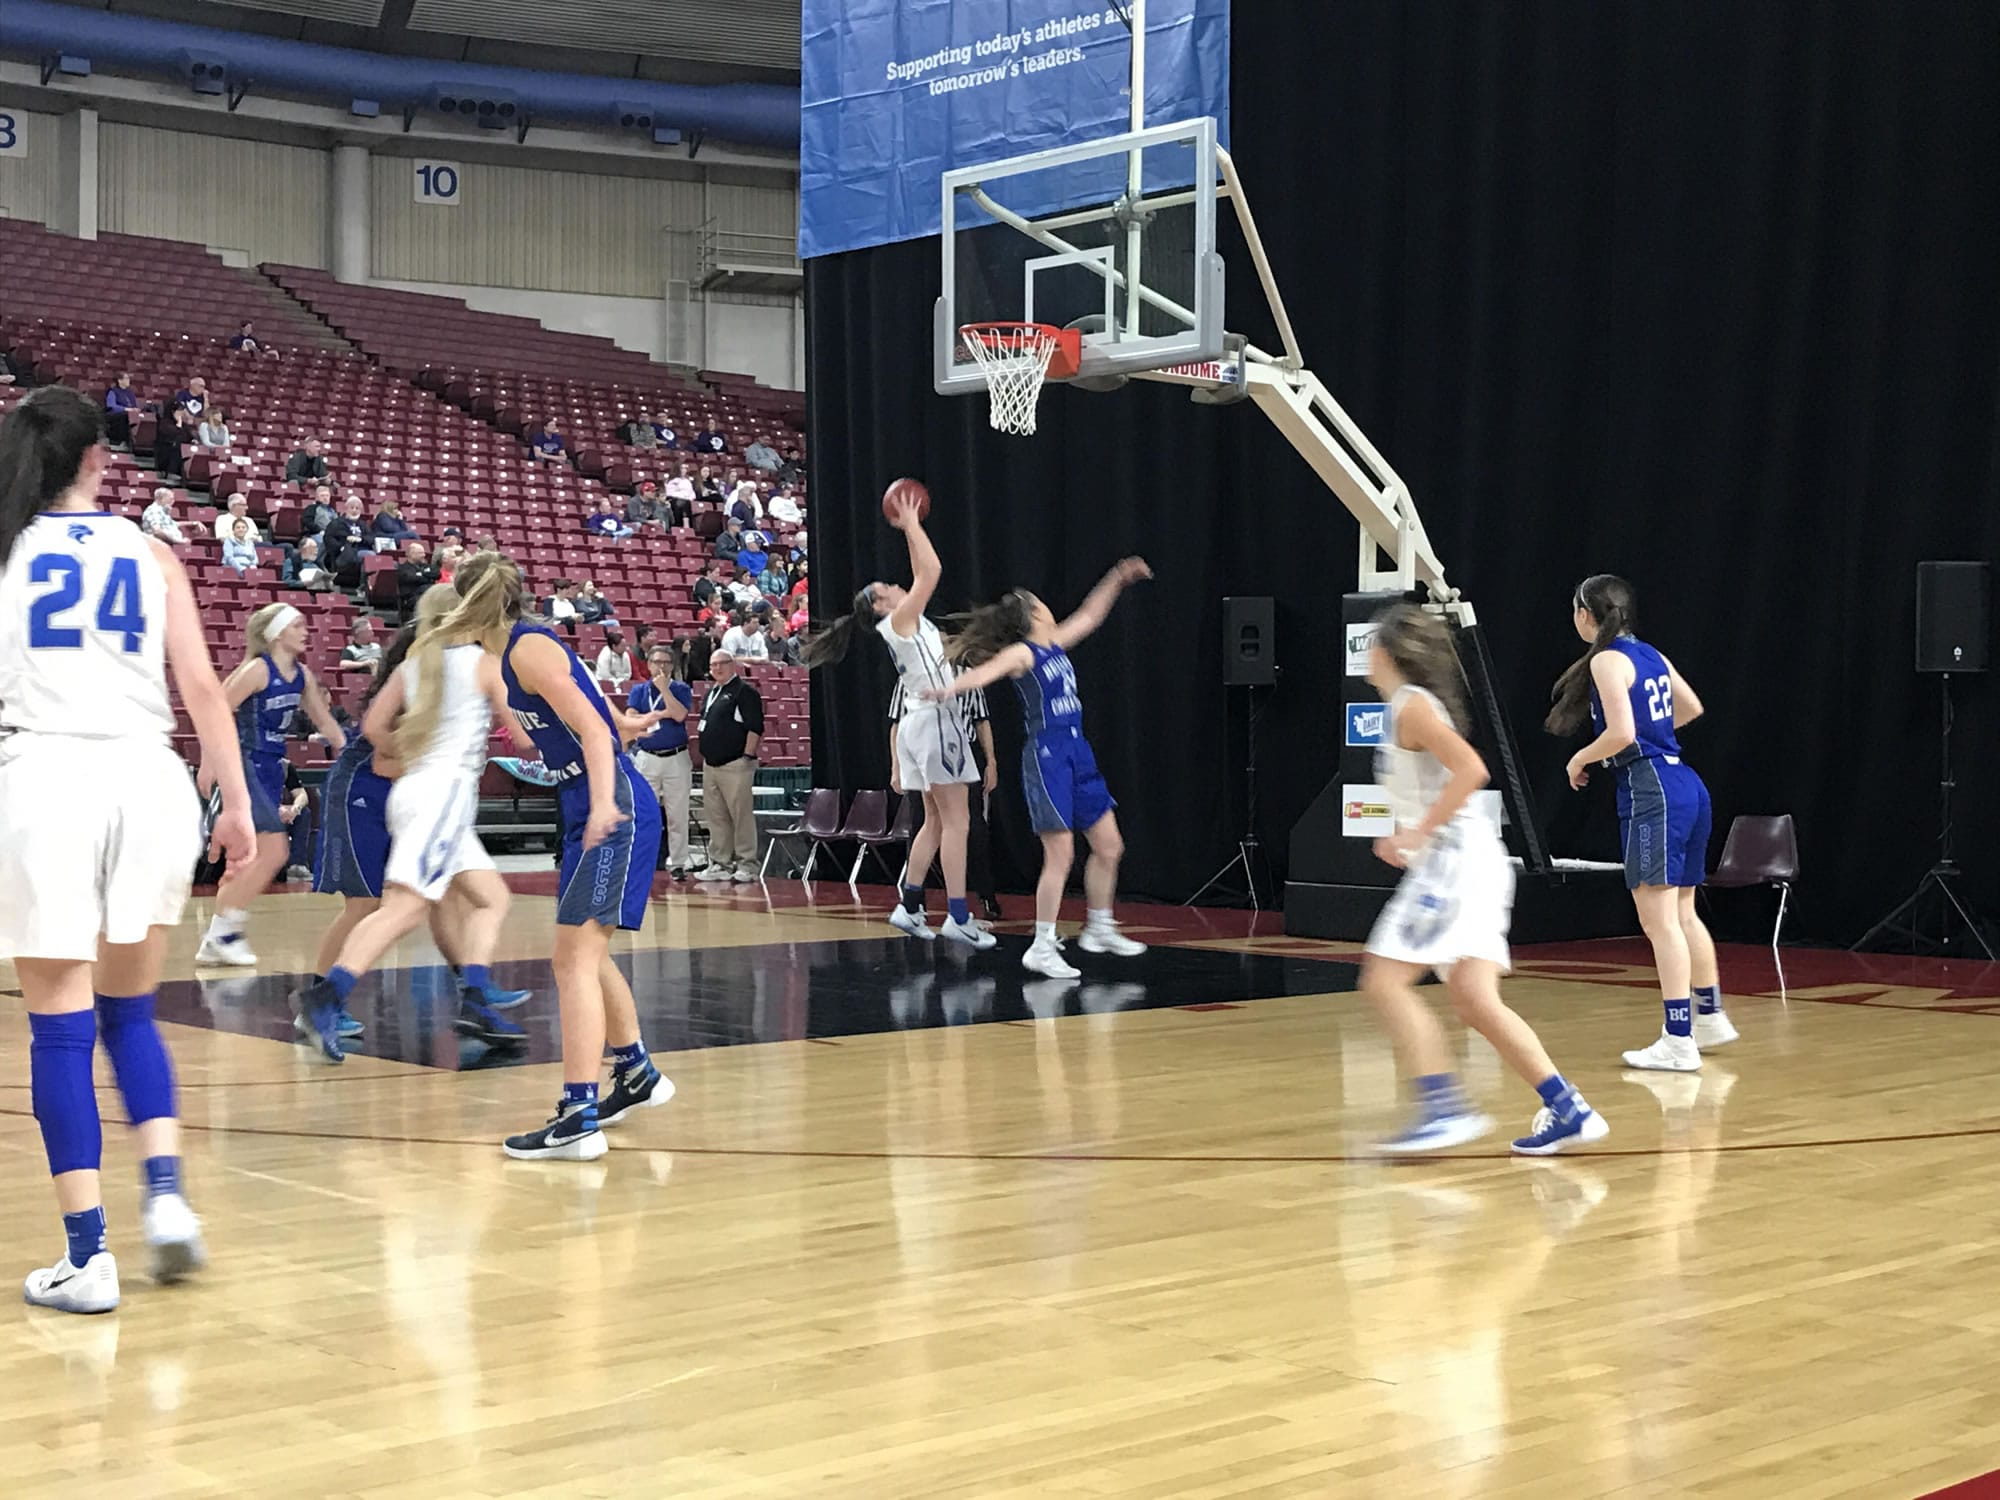 La Center's Taylor Mills goes up for two of her eight points during Friday's consolation semifinal against Bellevue Christian. The Wildcats lost, 44-33, to end their season at 23-3 overall.